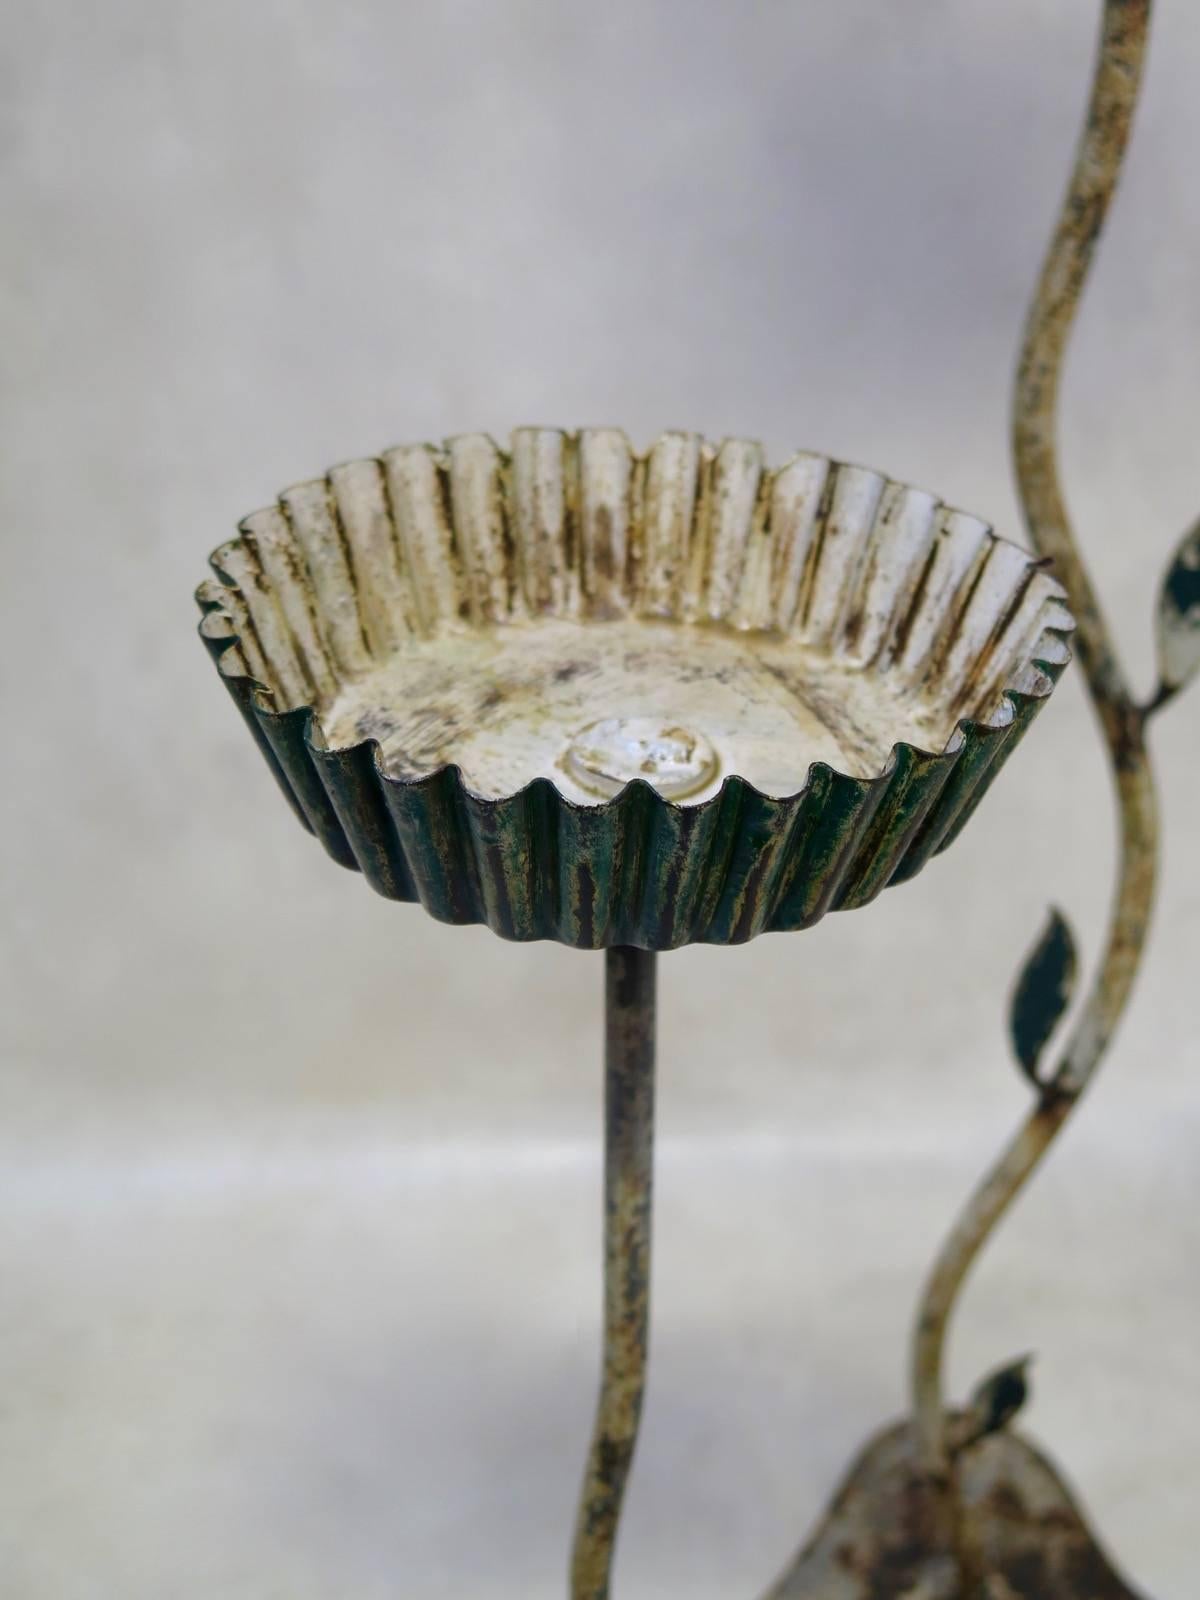 Unique set of five handmade Folk Art iron candleholders, raised on wavy triangular bases, with tall stems adorned with leaves along their lengths, and topped with large, flat candleholders with crimped edges. Traces of original white and green